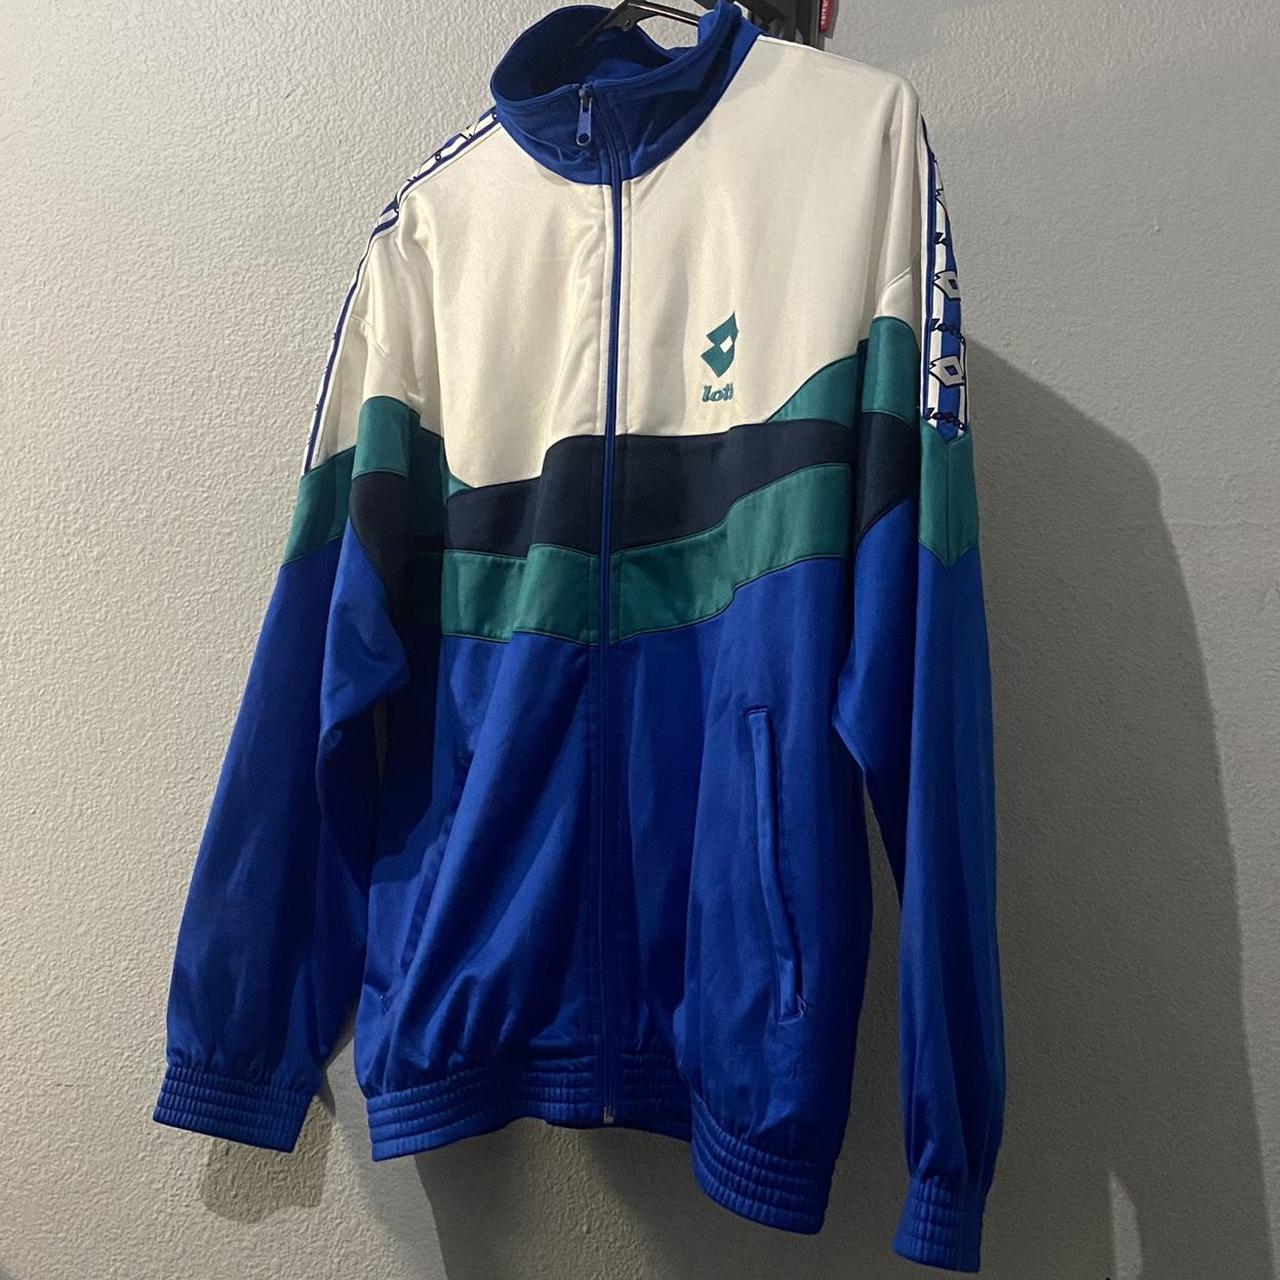 Lotto Men's Blue and White Jacket